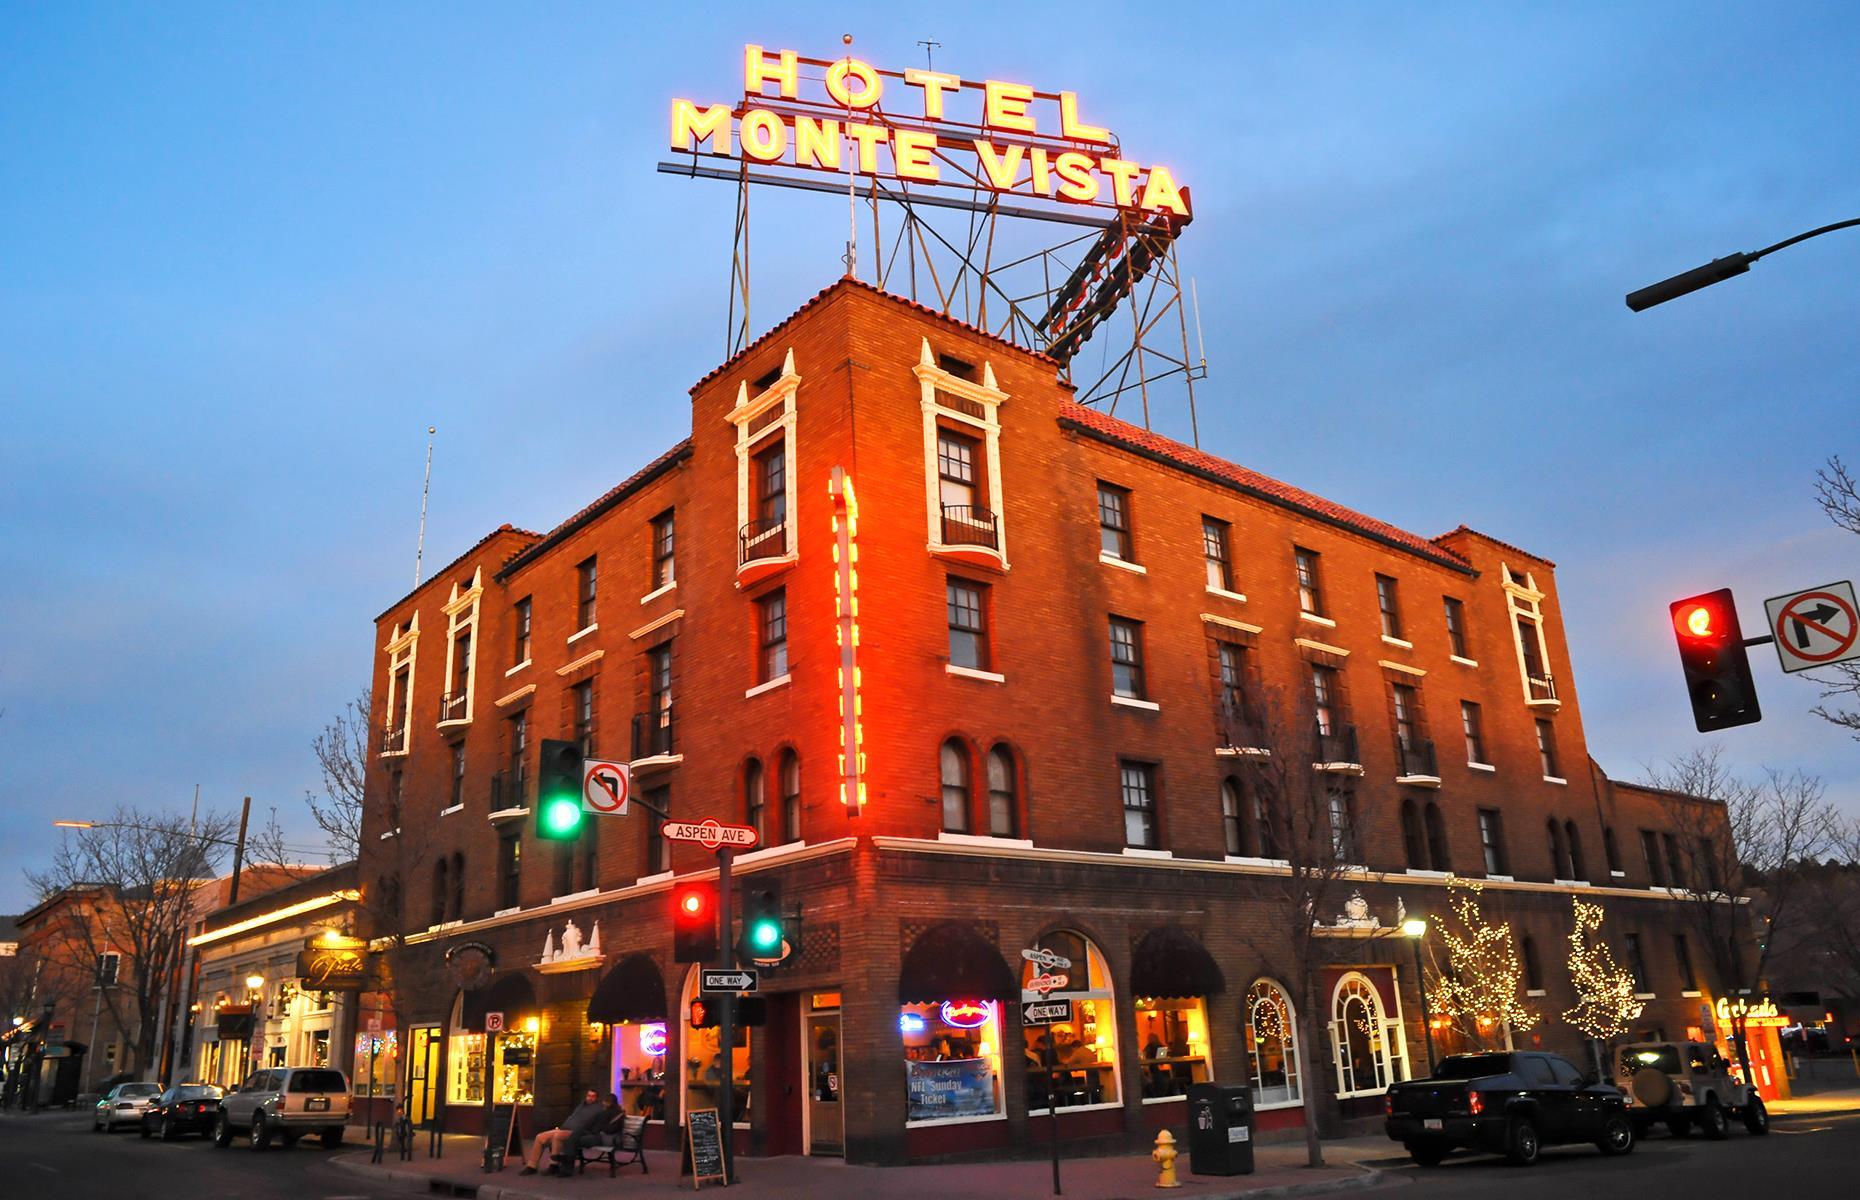 <p>Flagstaff's 1920s <a href="https://hotelmontevista.com/">Hotel Monte Vista</a> is apparently home to some of the creepiest ghosts in America. Among them is the super-scary former inhabitant "Meat Man" who apparently had a penchant for hanging raw meat about his room – it's said that guests have felt his presence in his old abode. There are also rumours of a phantom bellboy, once witnessed by Western star John Wayne.</p>